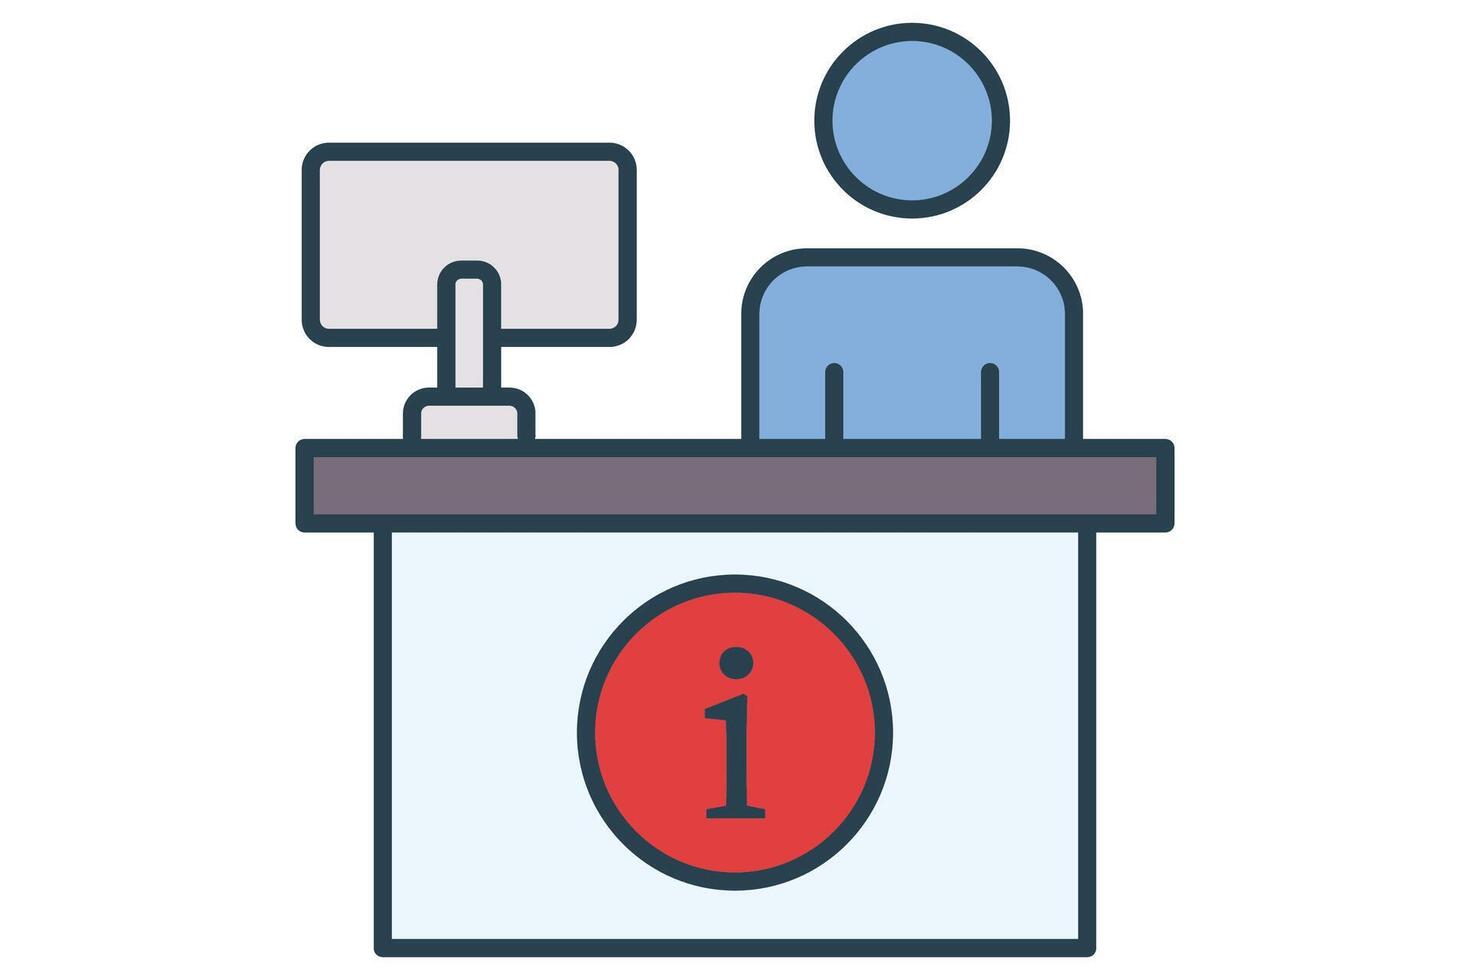 information desk icon. icon related to information and assistance. flat line icon style. element illustration vector